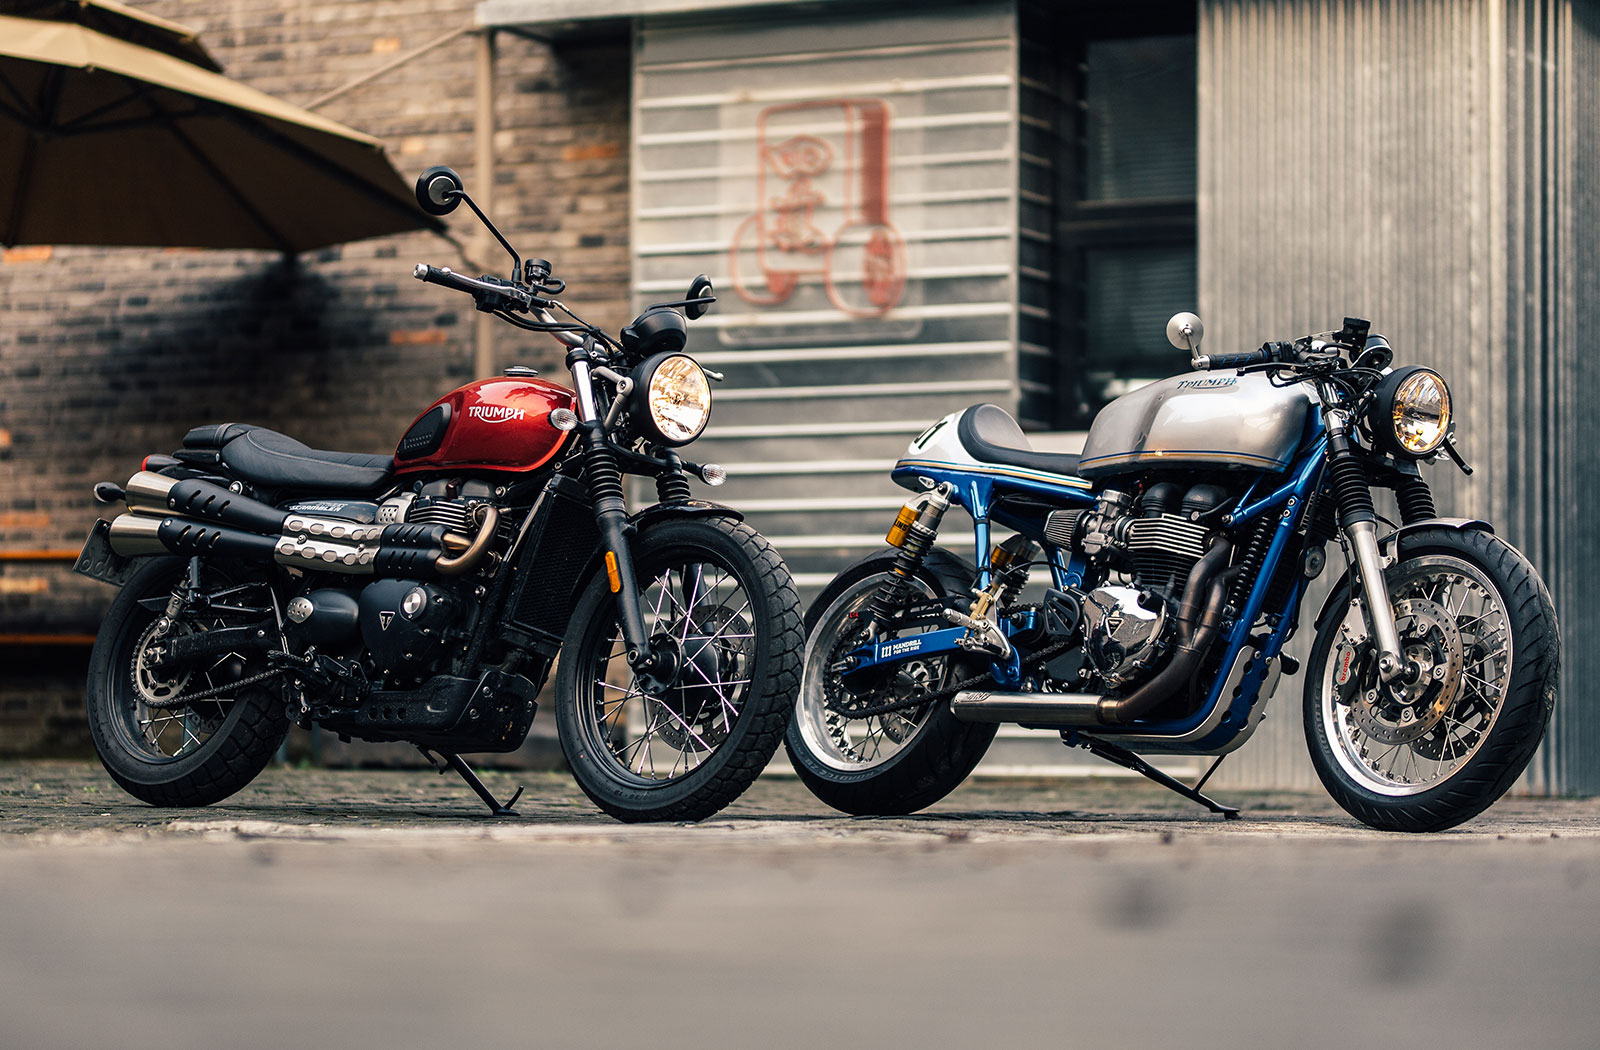 A watercooled Bonneville sitting beside an air-cooled T100 cafe racer